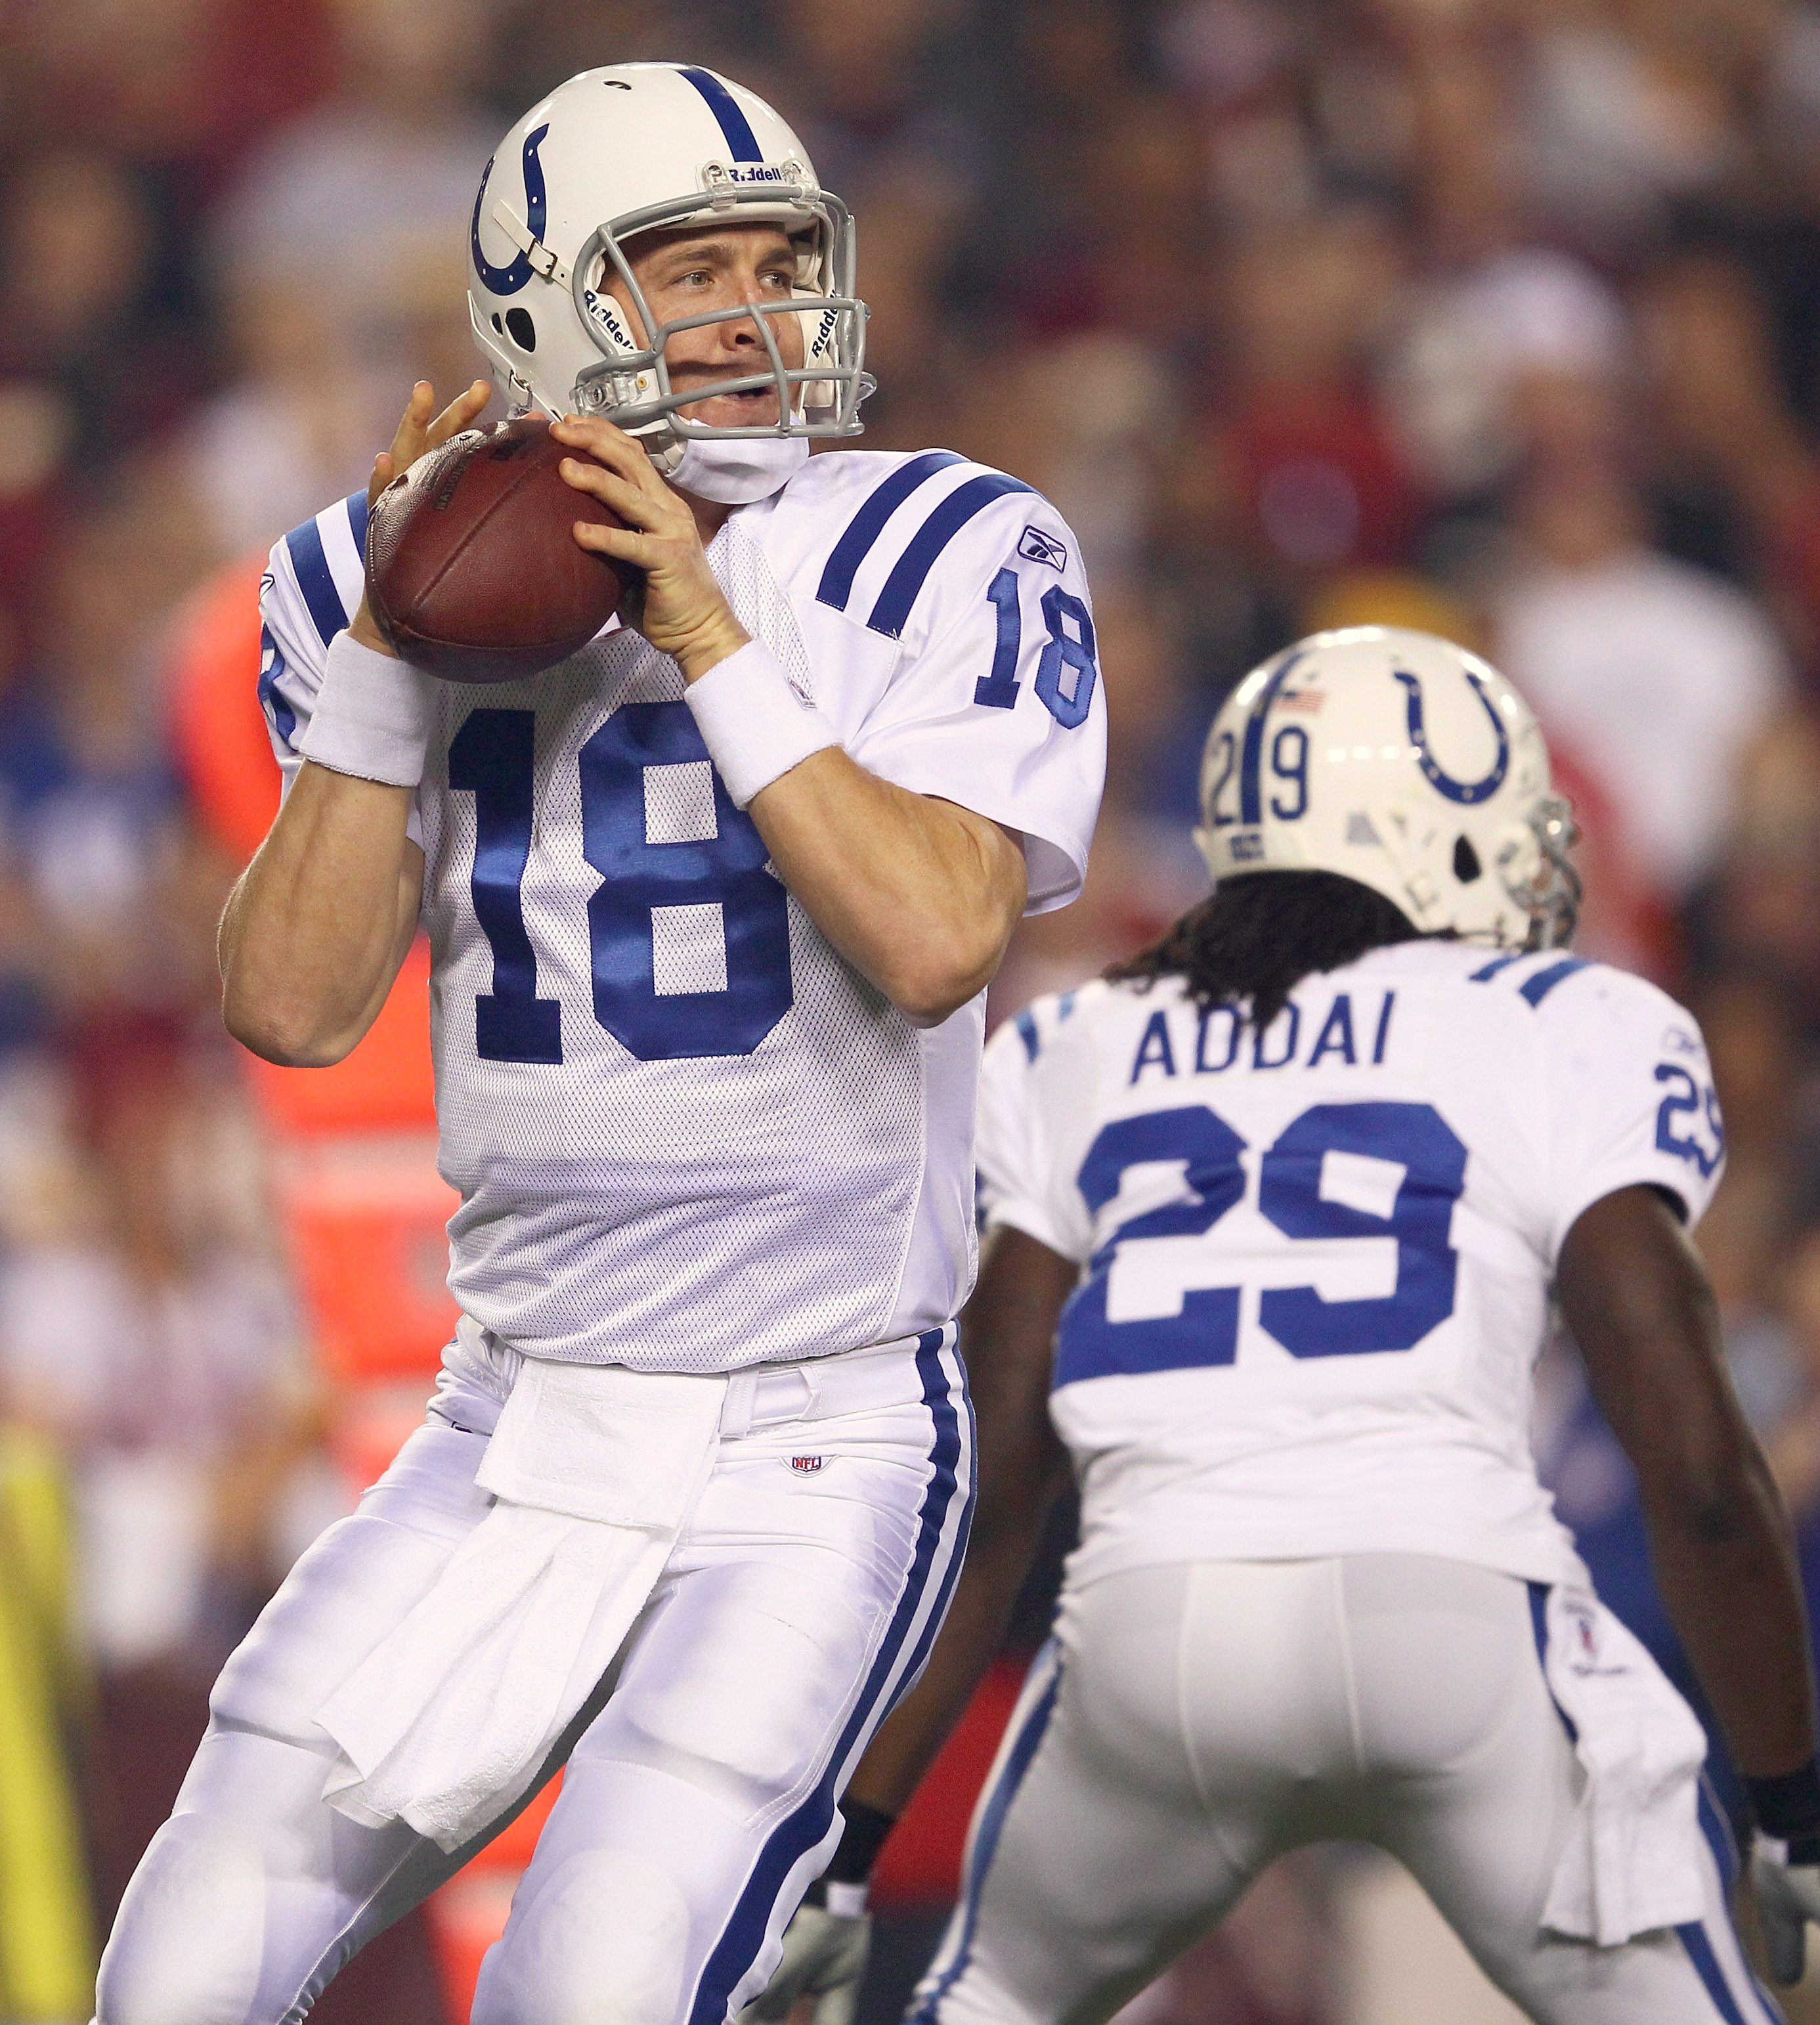 Report: Indianapolis Colts to cut QB Peyton Manning